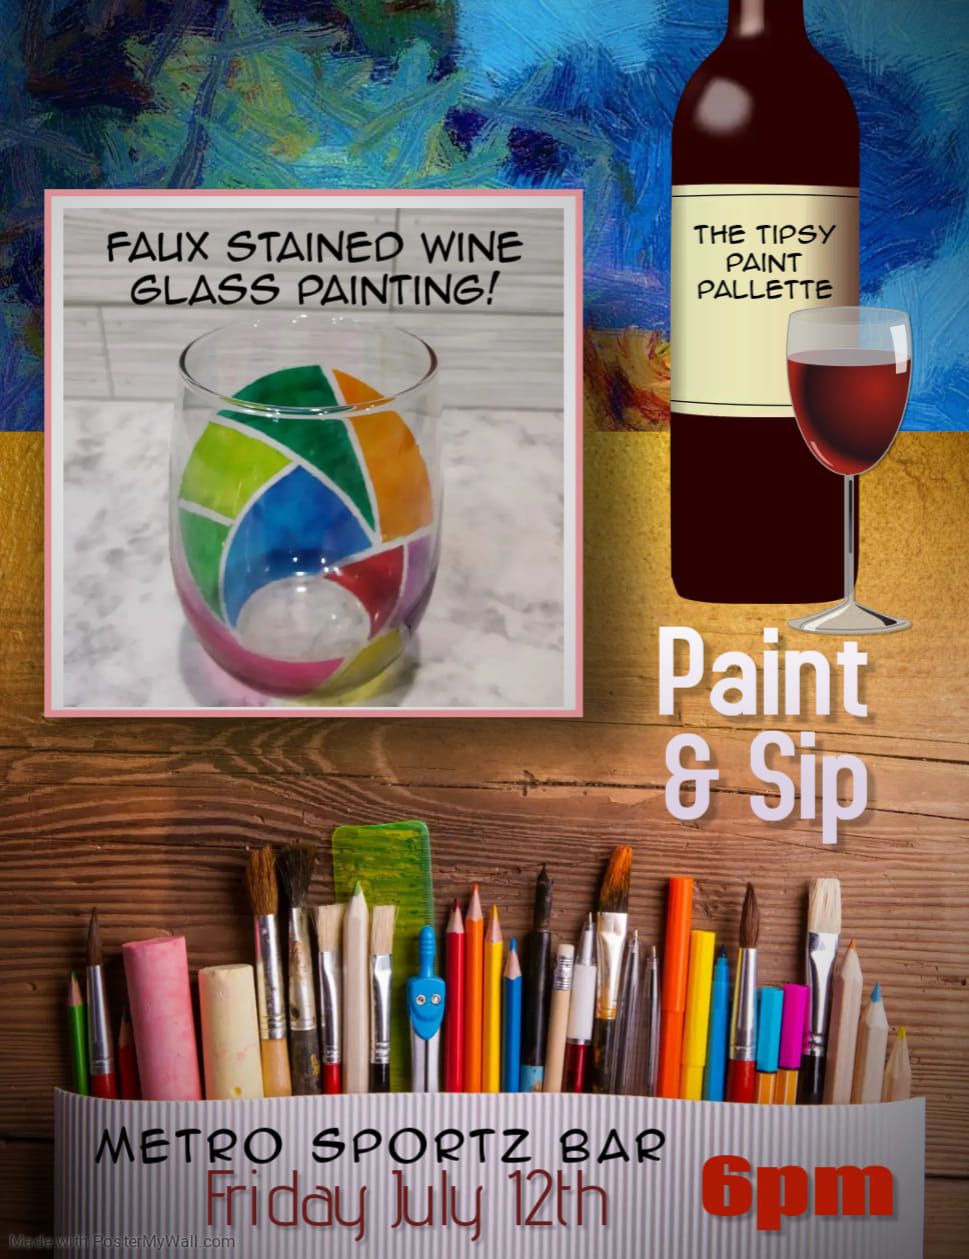 Faux Stained Wine Glass Painting At Metro Sportz Bar 